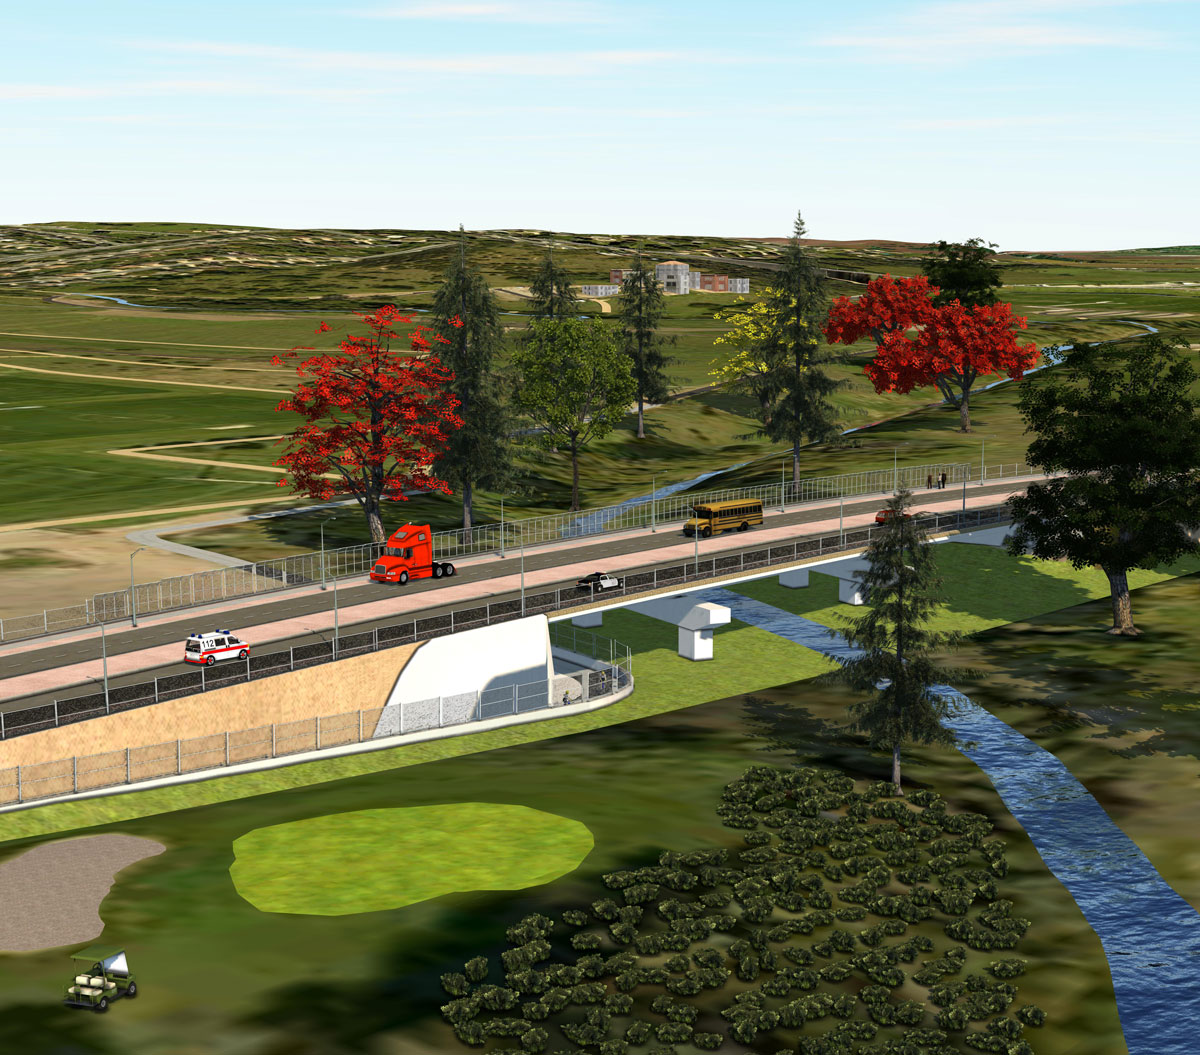 3D rendering of the proposed Big Papillion Creek Bridge with trail undercrossing.